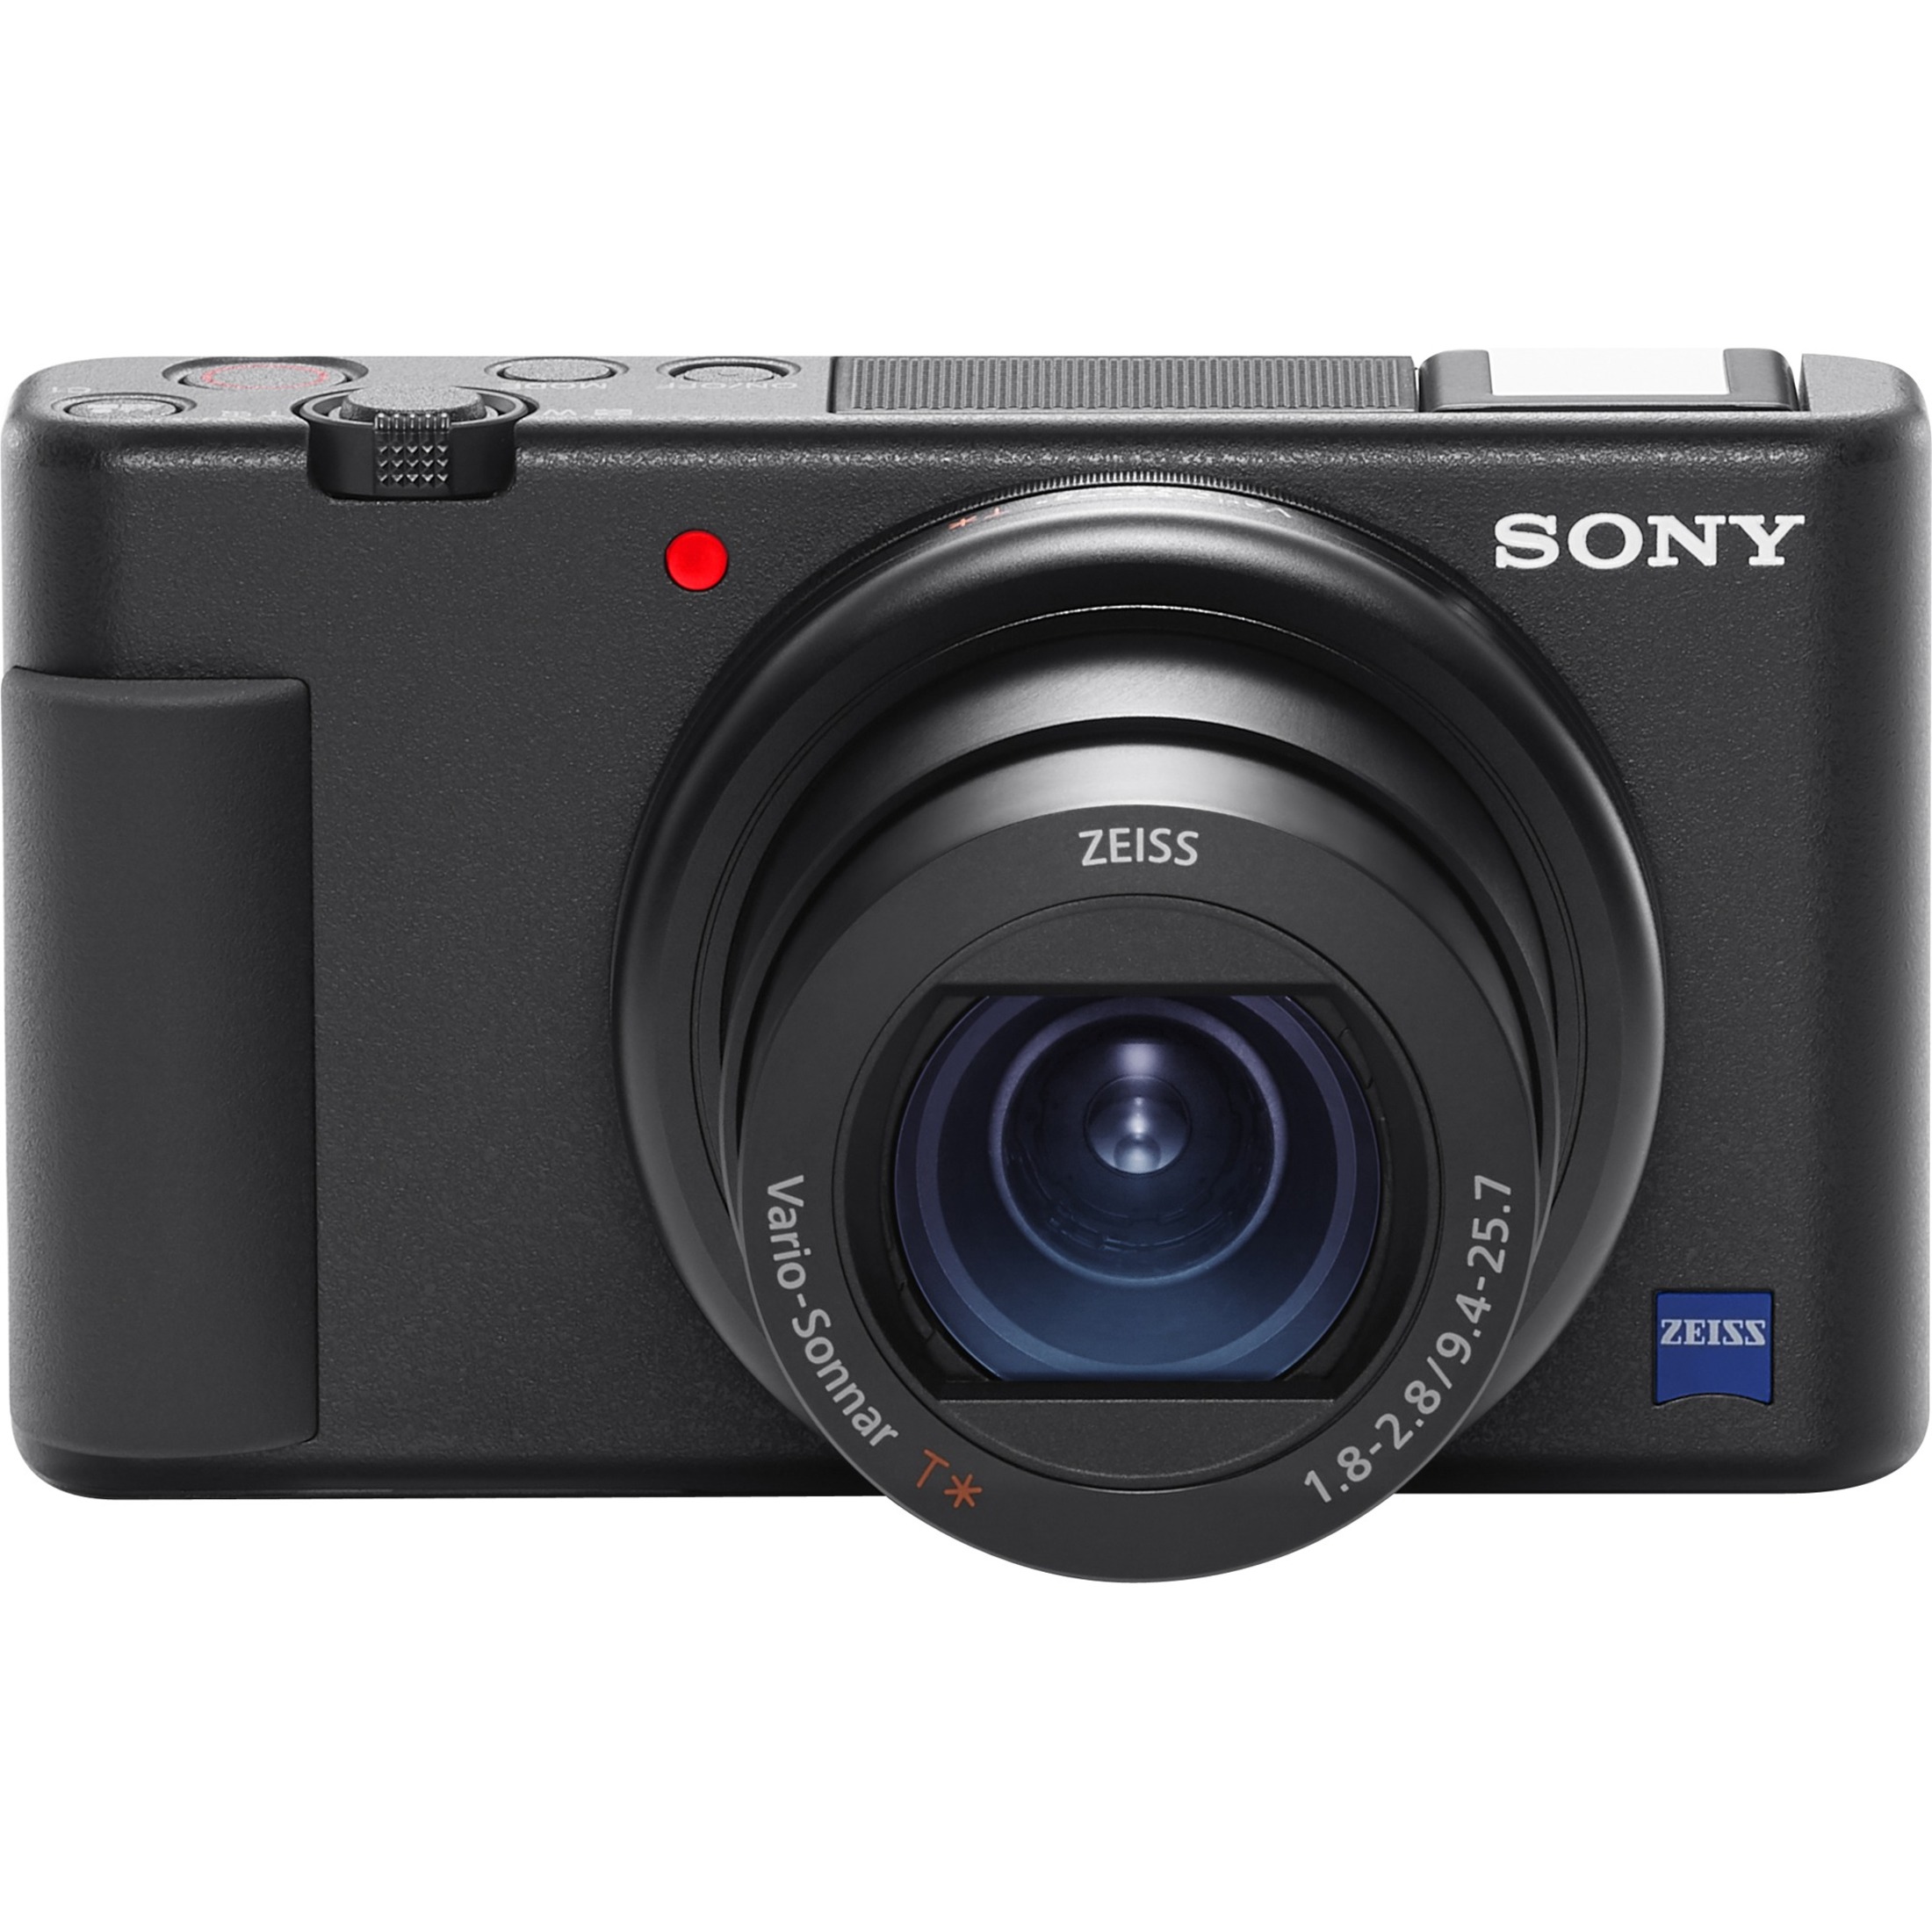 Sony ZV-1 20.1 Megapixel Compact Camera, Black - image 11 of 29